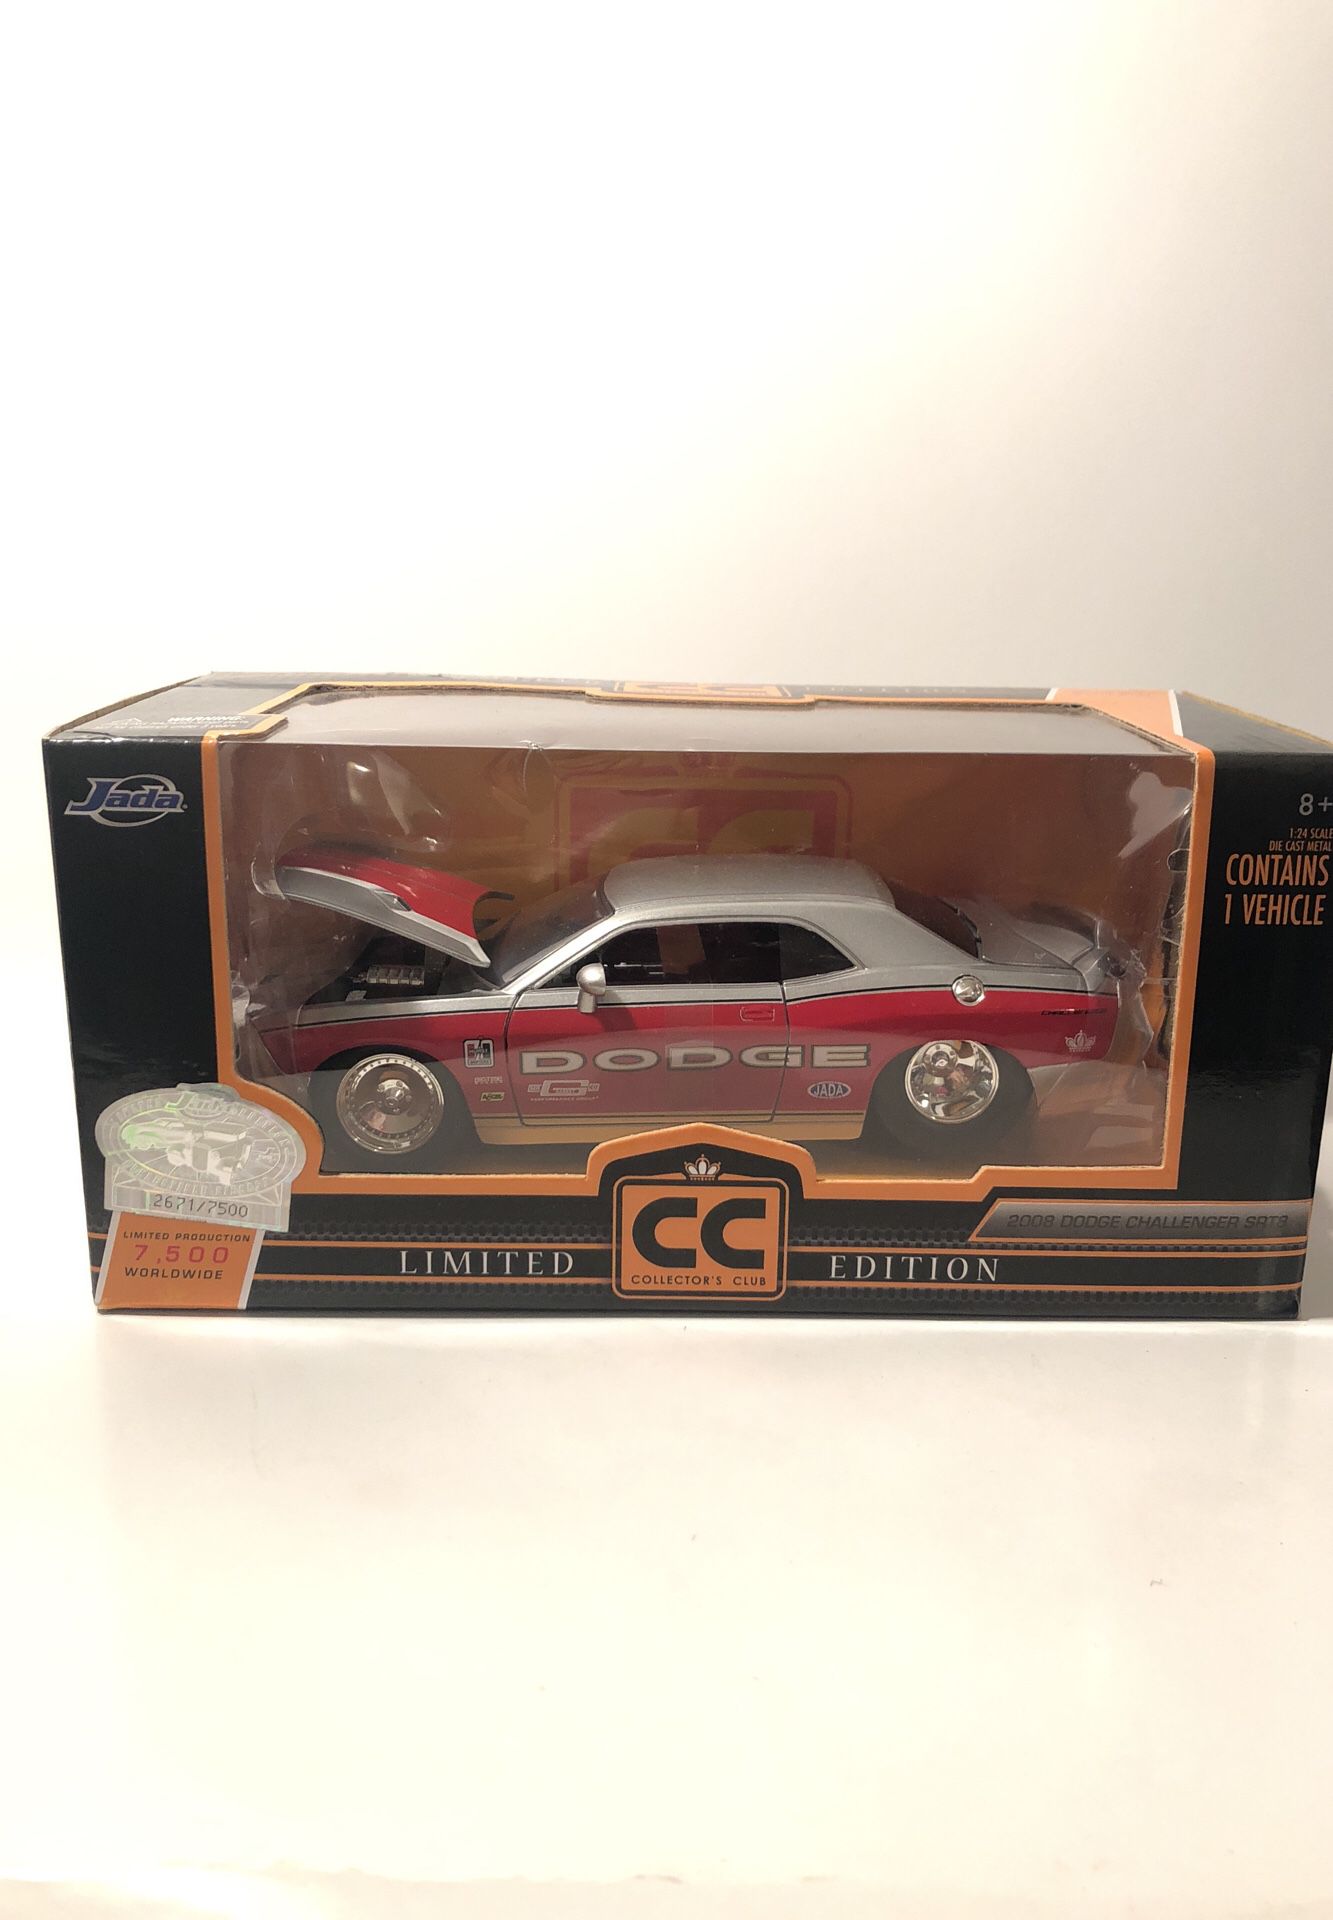 Jada Dodge Challenger limited edition collectible